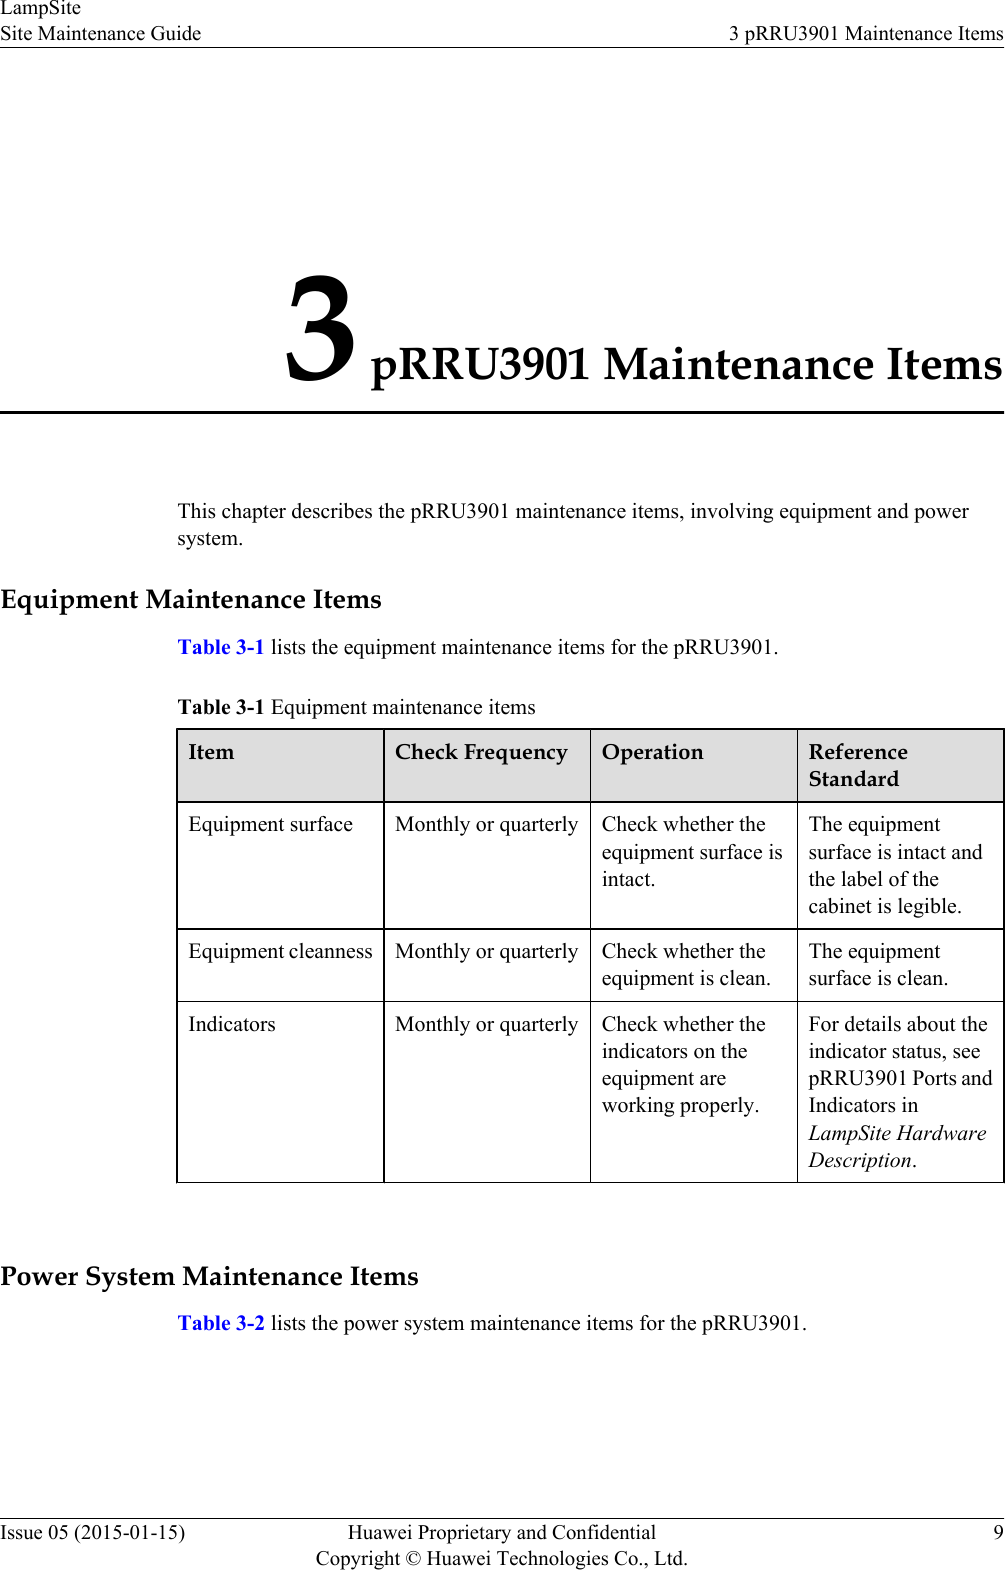 3 pRRU3901 Maintenance ItemsThis chapter describes the pRRU3901 maintenance items, involving equipment and powersystem.Equipment Maintenance ItemsTable 3-1 lists the equipment maintenance items for the pRRU3901.Table 3-1 Equipment maintenance itemsItem Check Frequency Operation ReferenceStandardEquipment surface Monthly or quarterly Check whether theequipment surface isintact.The equipmentsurface is intact andthe label of thecabinet is legible.Equipment cleanness Monthly or quarterly Check whether theequipment is clean.The equipmentsurface is clean.Indicators Monthly or quarterly Check whether theindicators on theequipment areworking properly.For details about theindicator status, seepRRU3901 Ports andIndicators inLampSite HardwareDescription. Power System Maintenance ItemsTable 3-2 lists the power system maintenance items for the pRRU3901.LampSiteSite Maintenance Guide 3 pRRU3901 Maintenance ItemsIssue 05 (2015-01-15) Huawei Proprietary and ConfidentialCopyright © Huawei Technologies Co., Ltd.9